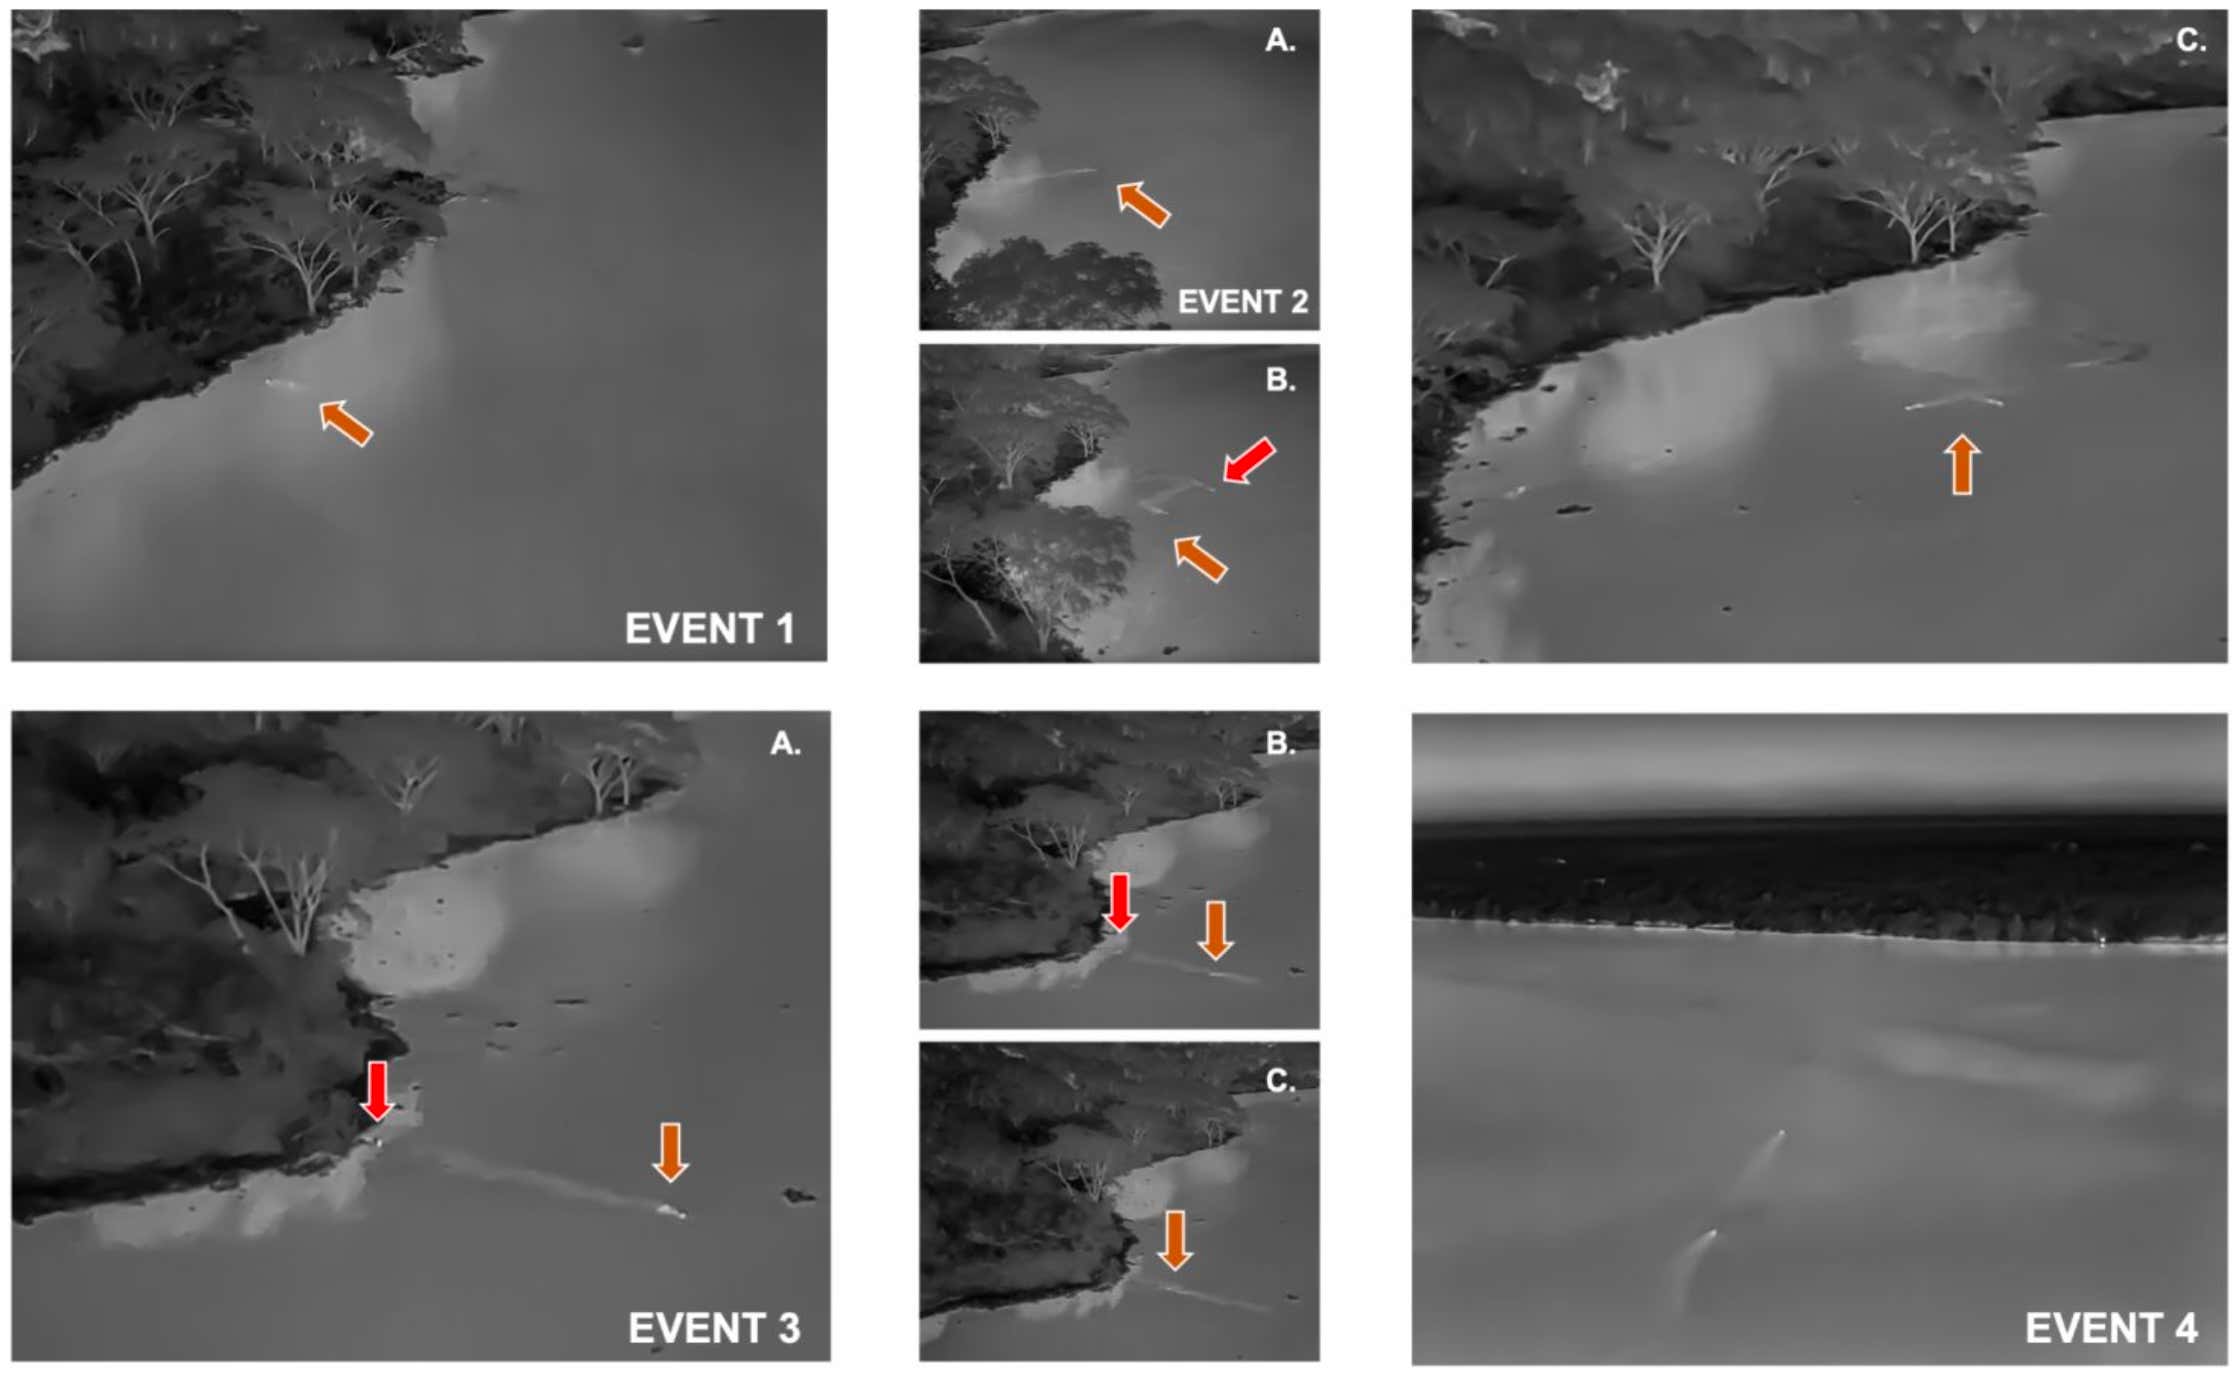 Thermal stills show the thermal signature of two lions as they cross the English Channel.